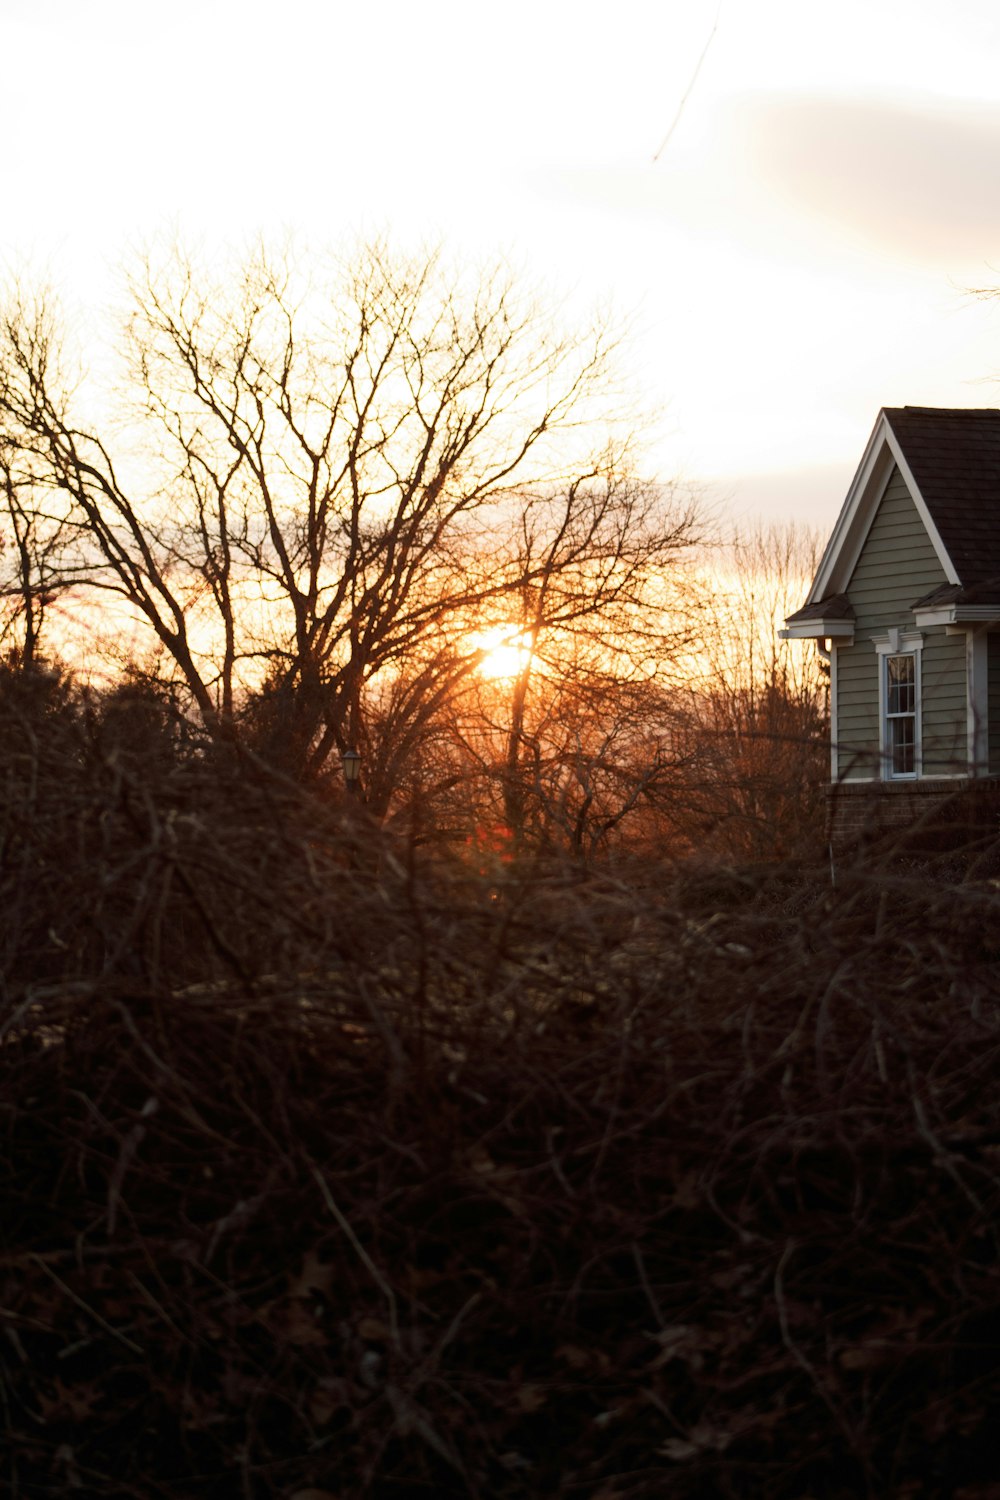 the sun is setting behind a house in a field